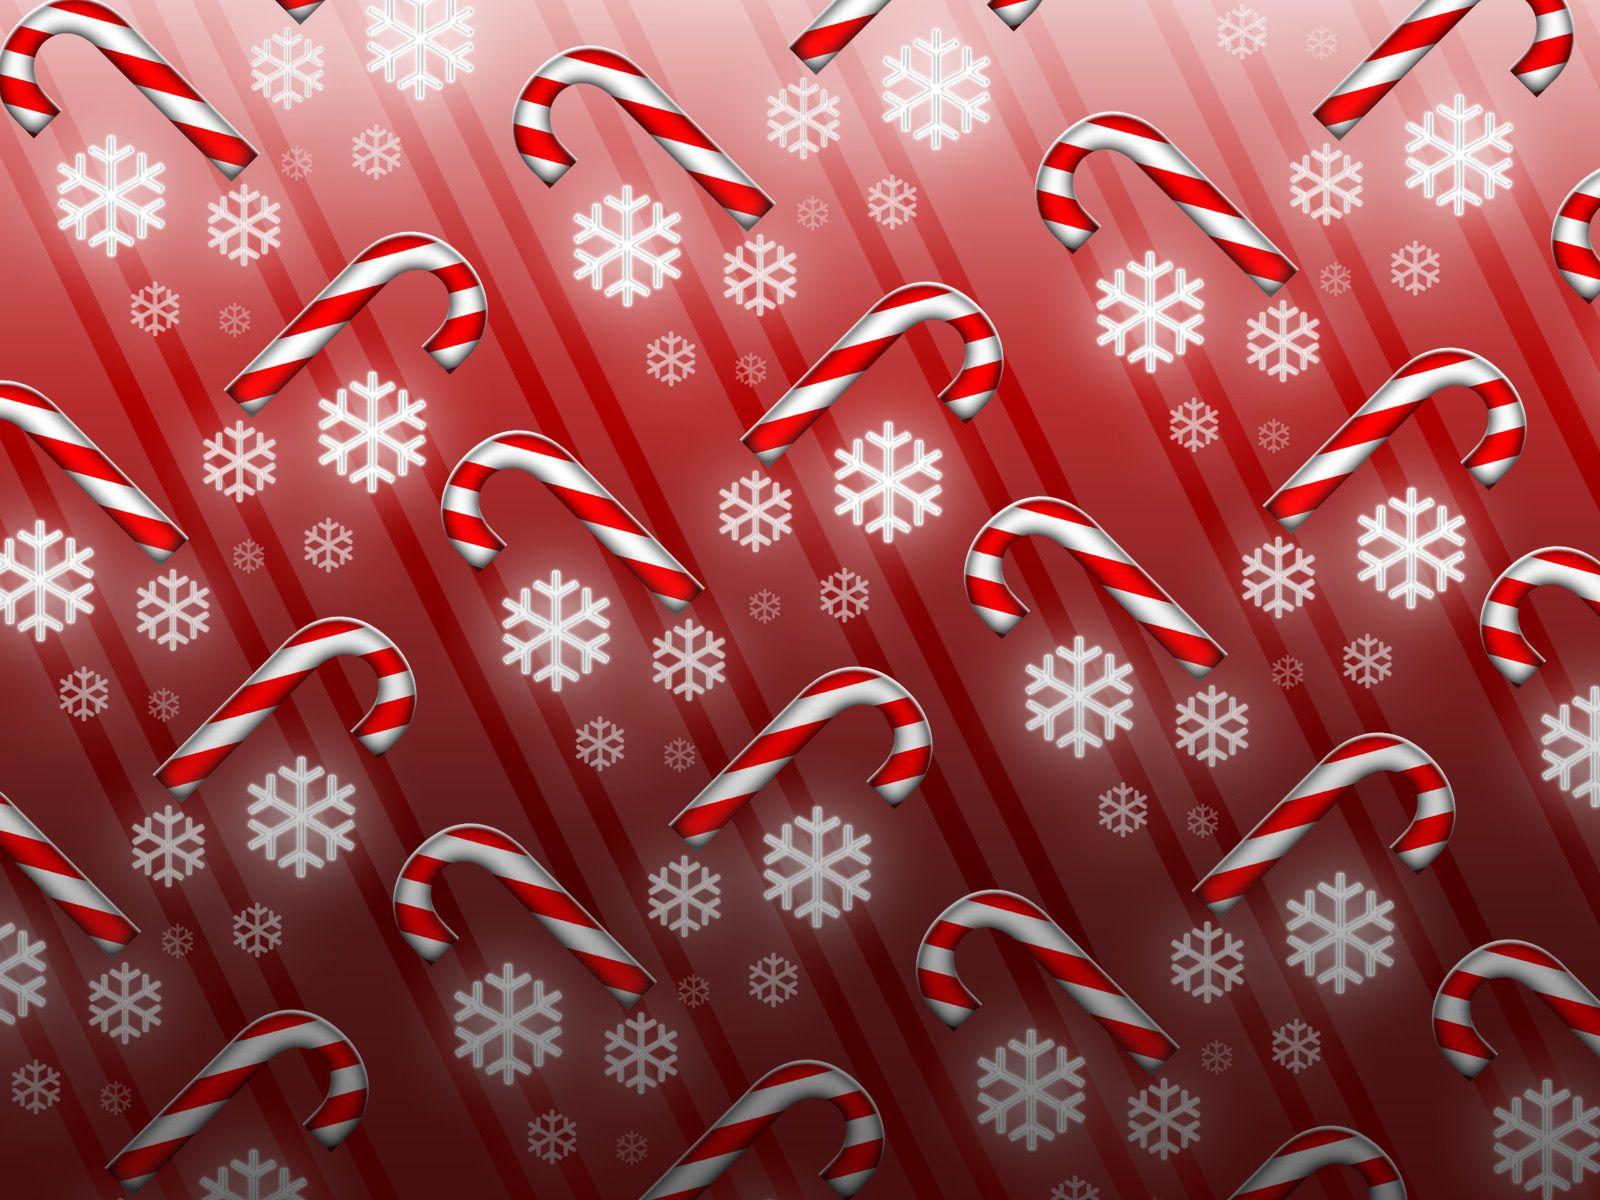 Candy Cane Art Holiday Wallpaper 52143 1600x1200px